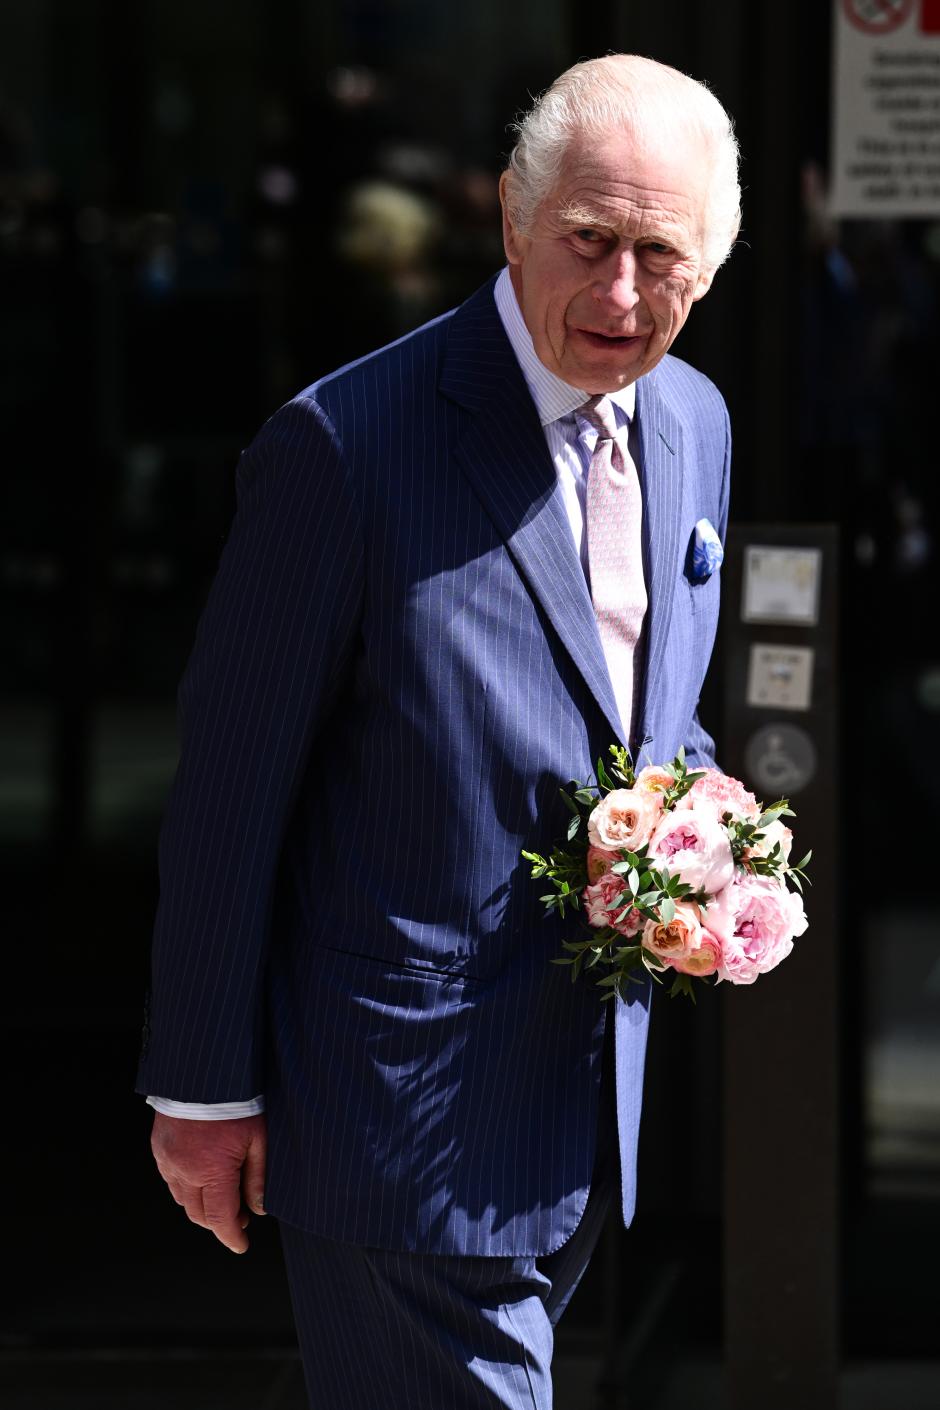 Mandatory Credit: Photo by James Veysey/Shutterstock (14455453v)
King Charles III
King Charles III and Queen Camilla visit UCH Macmillan Cancer Centre, London, UK - 30 Apr 2024
The King, Patron of Cancer Research UK and Macmillan Cancer Support, and Queen will visit the University College Hospital Macmillan Cancer Centre, meeting patients and staff. This visit will raise awareness of the importance of early diagnosis and will highlight some of the innovative research, supported by Cancer Research UK, which is taking place at the hospital.  

The visit also will mark His Majesty's first day as the new Patron of Cancer Research UK. University College Hospital Macmillan Cancer Centre, Huntley St, London WC1E 6AG. *** Local Caption *** .